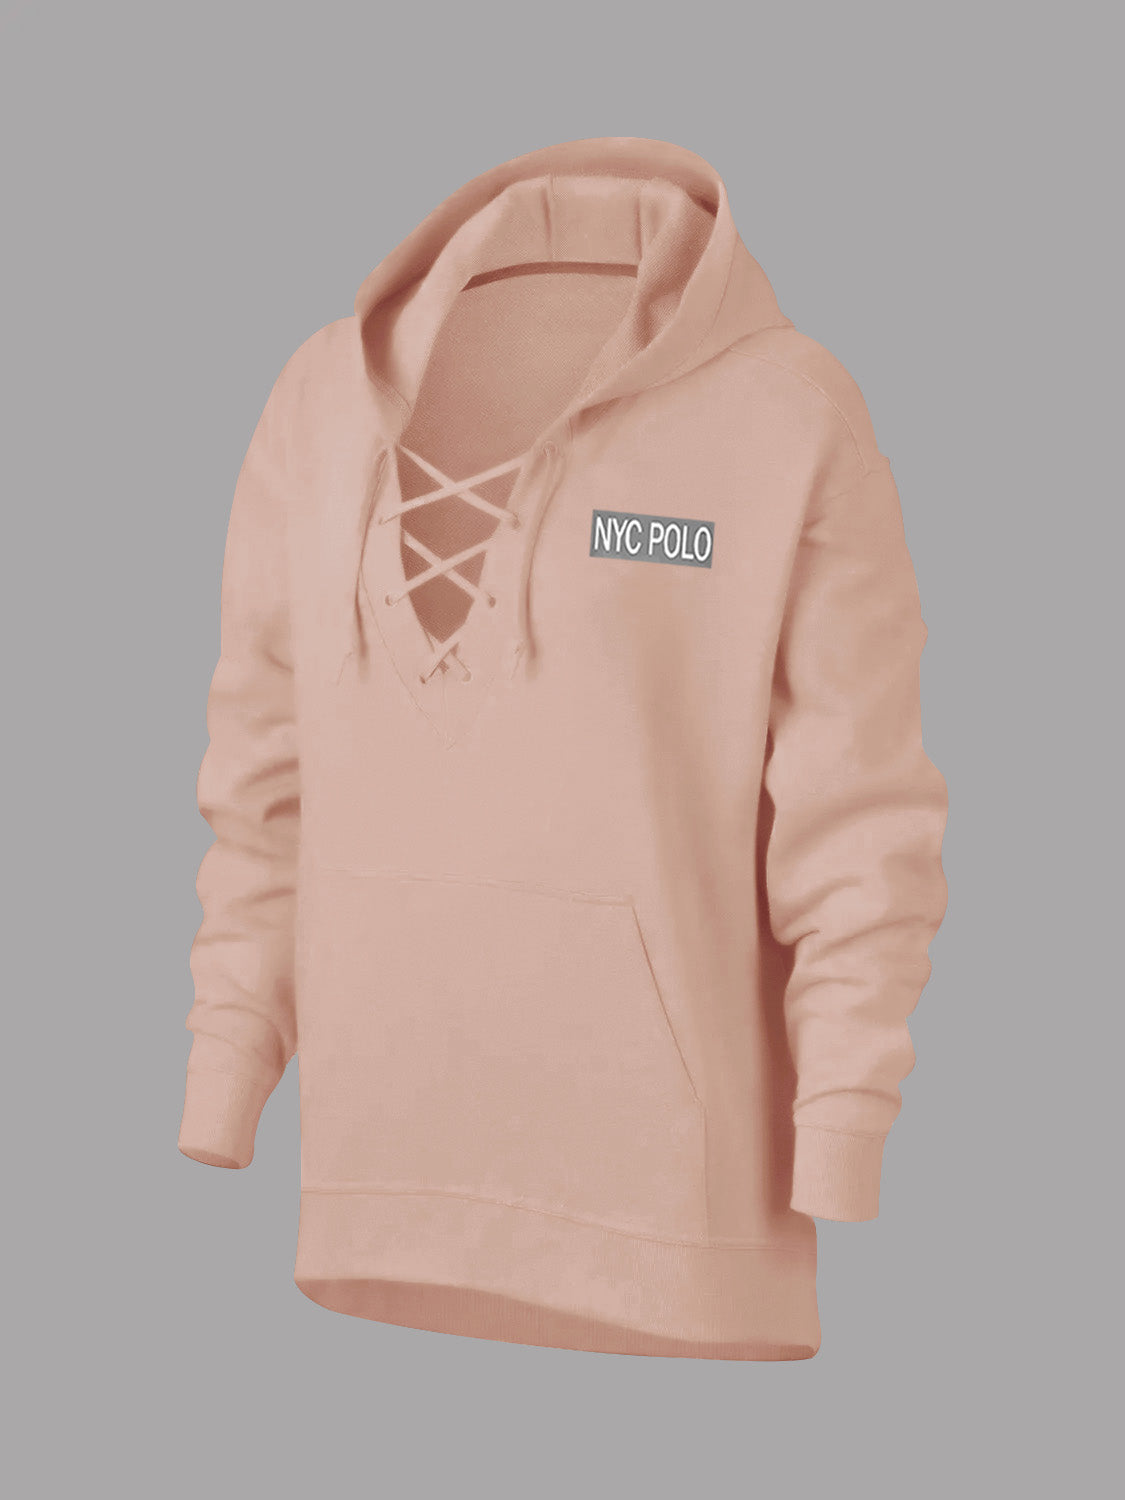 Nyc Polo Terry Fleece V Neck Laseup Hoodie For Ladies-Light Coral Pink-SP1556